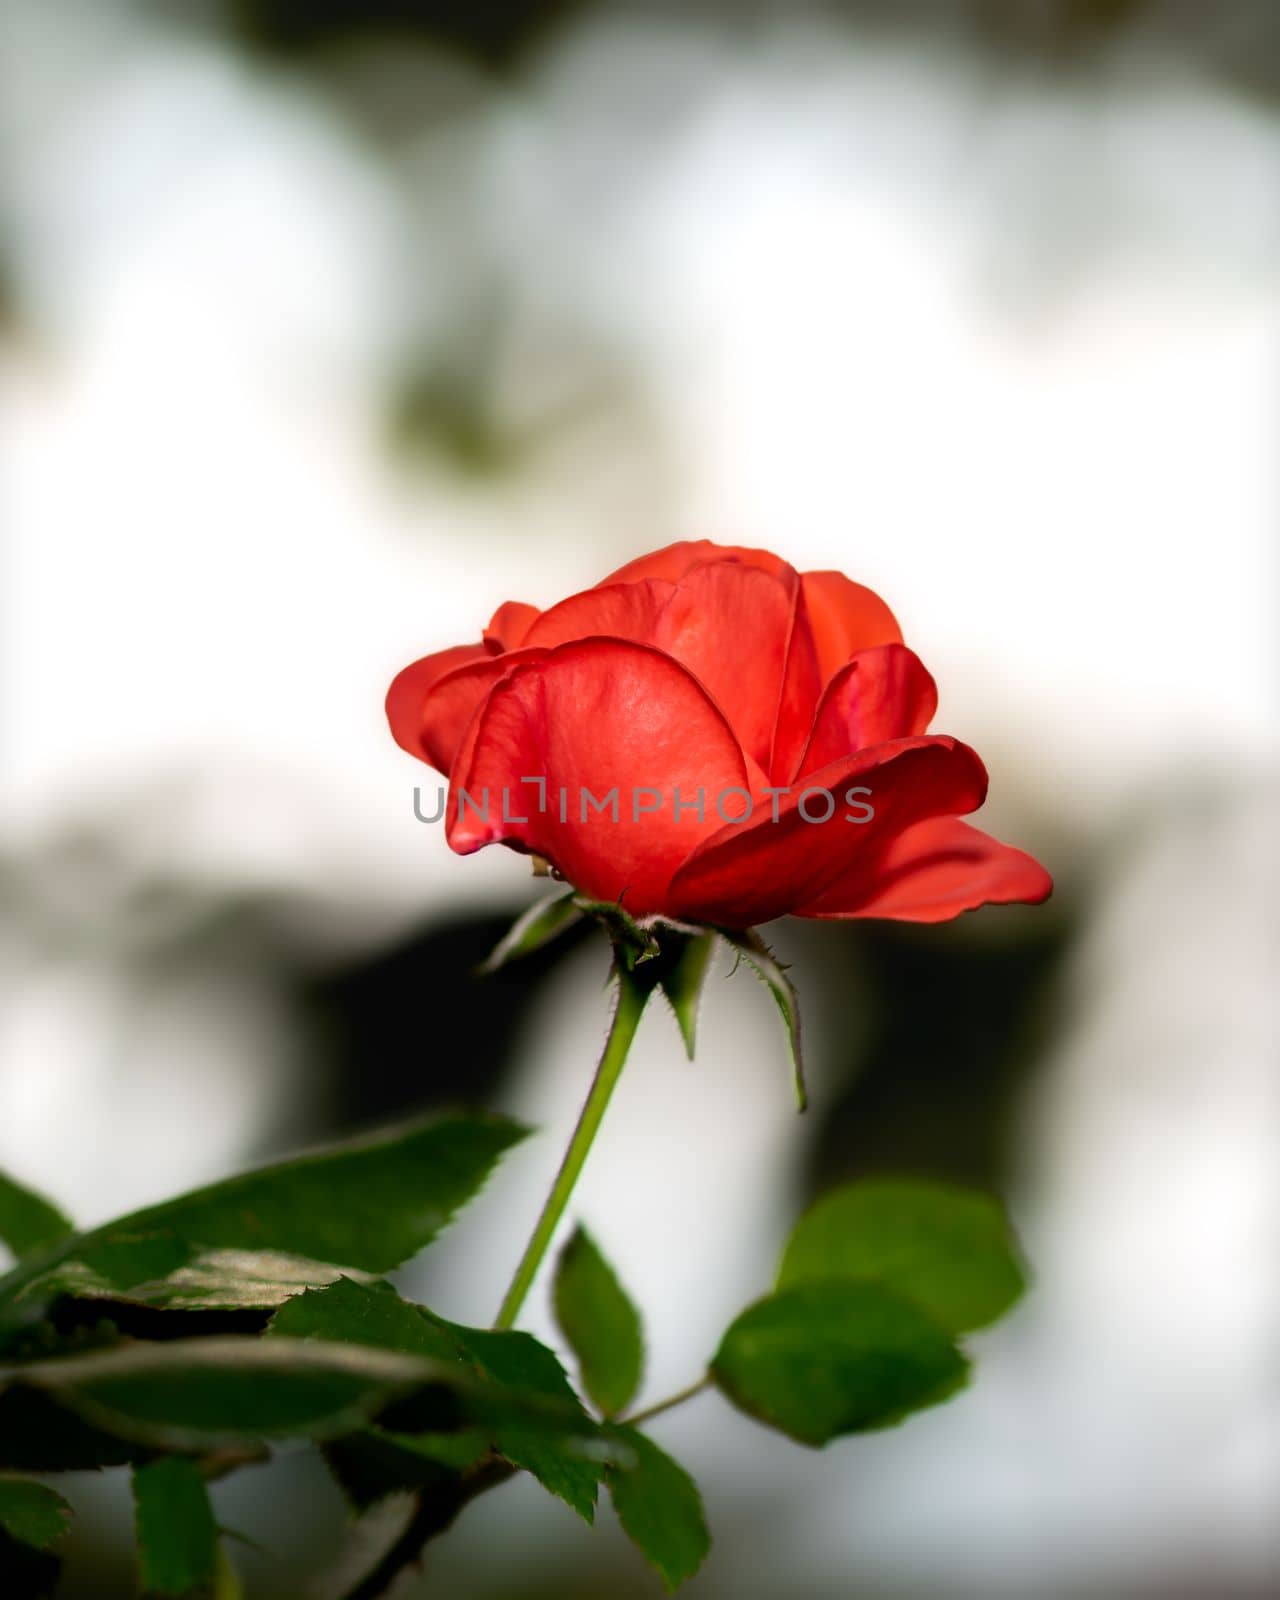 Red rose flower on blurred background by Millenn